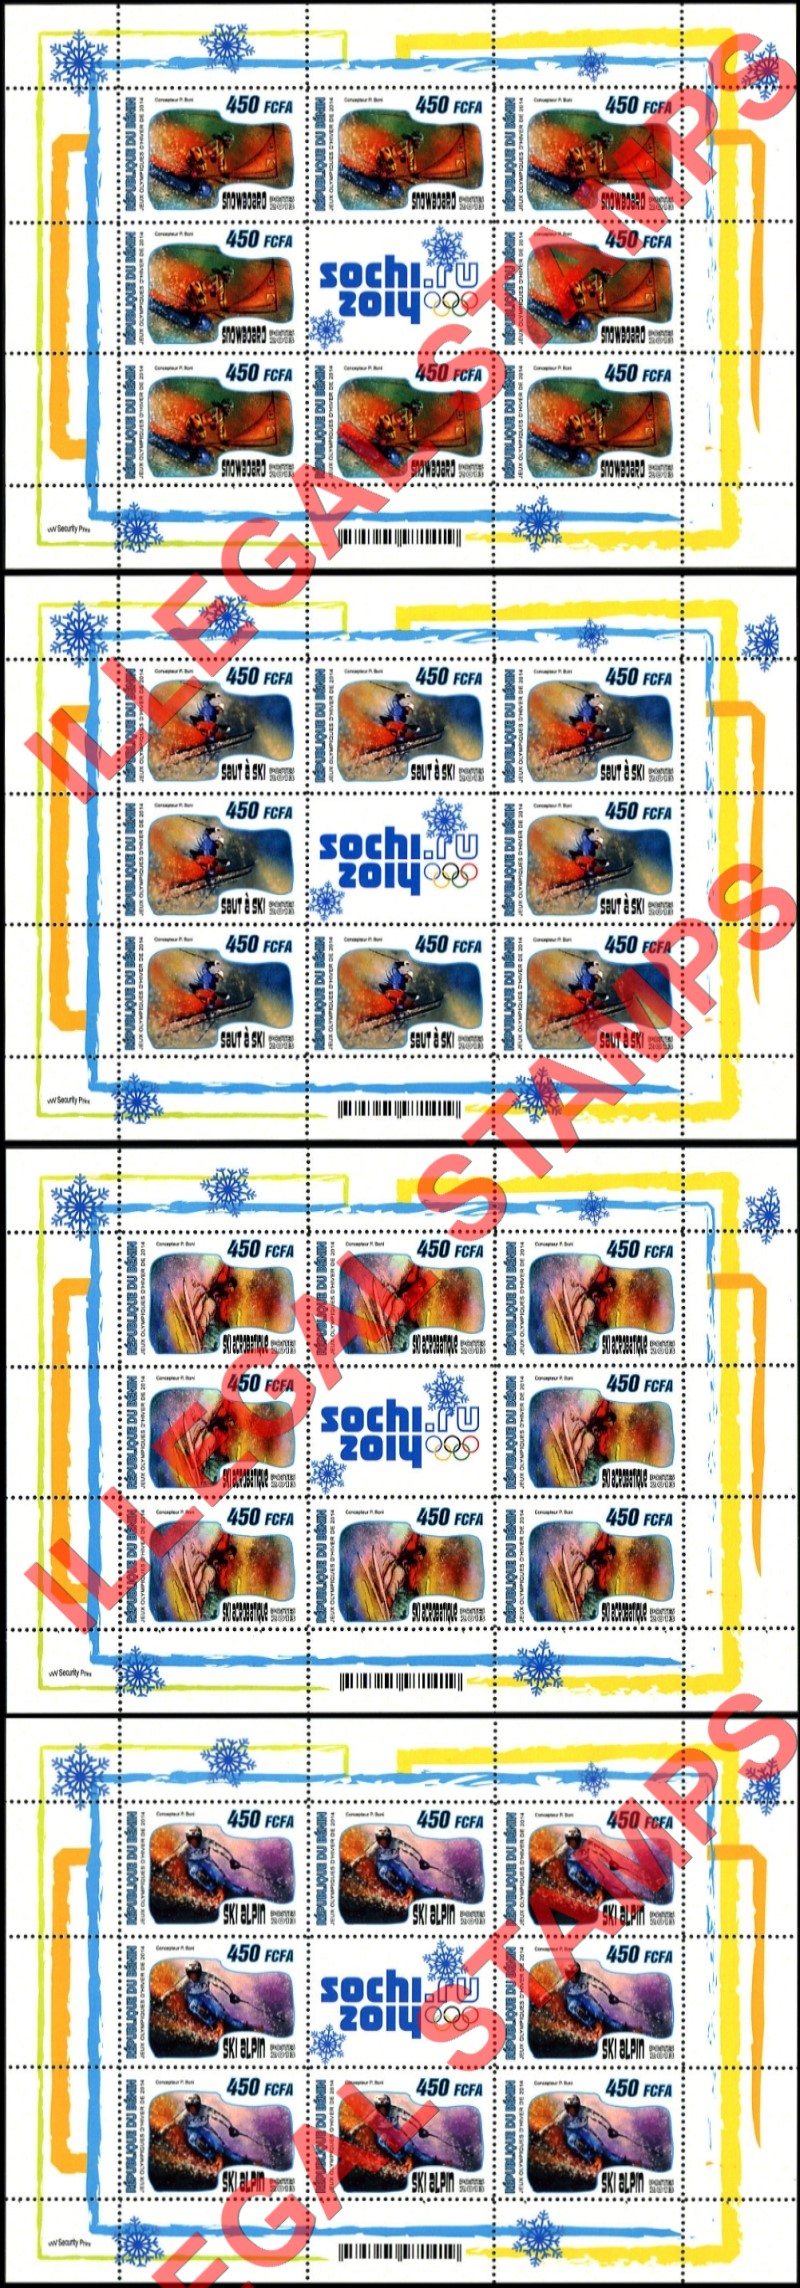 Benin 2013 Winter Olympic Games (2014) Illegal Stamp Sheetlets of 9 (Part 2)